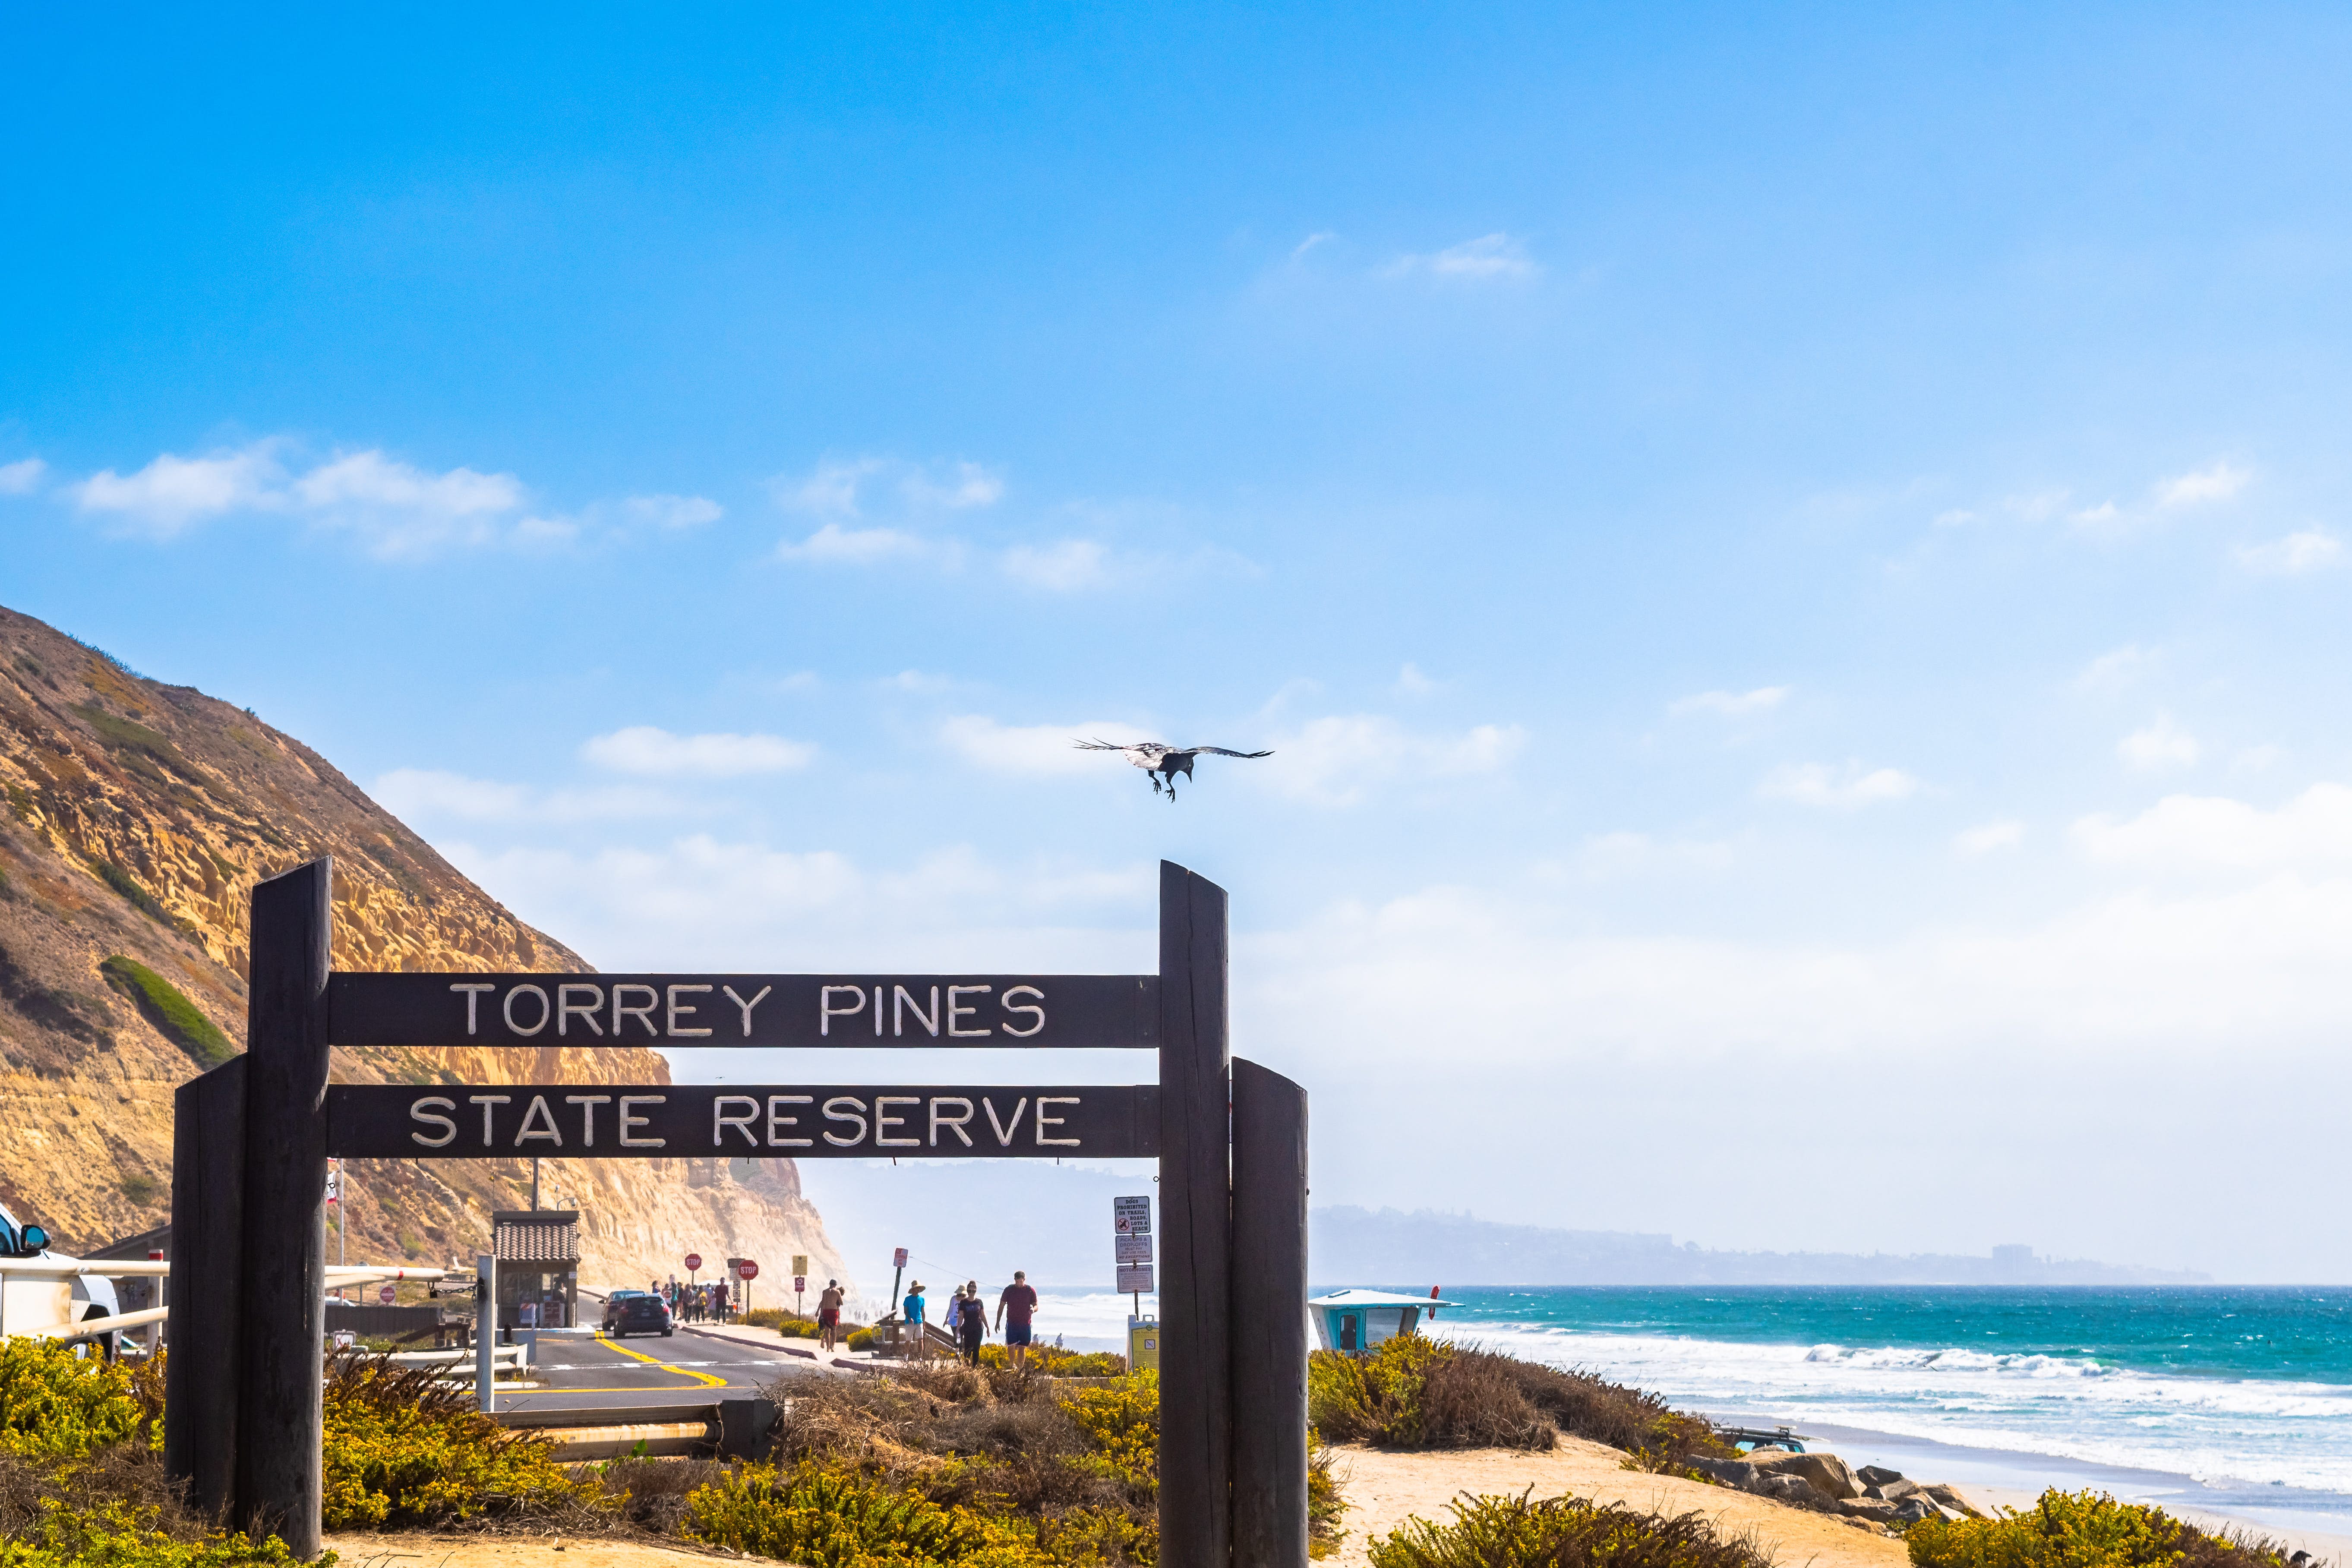 Wooden sign saying "Torrey Pines State Reserve" in La Jolla